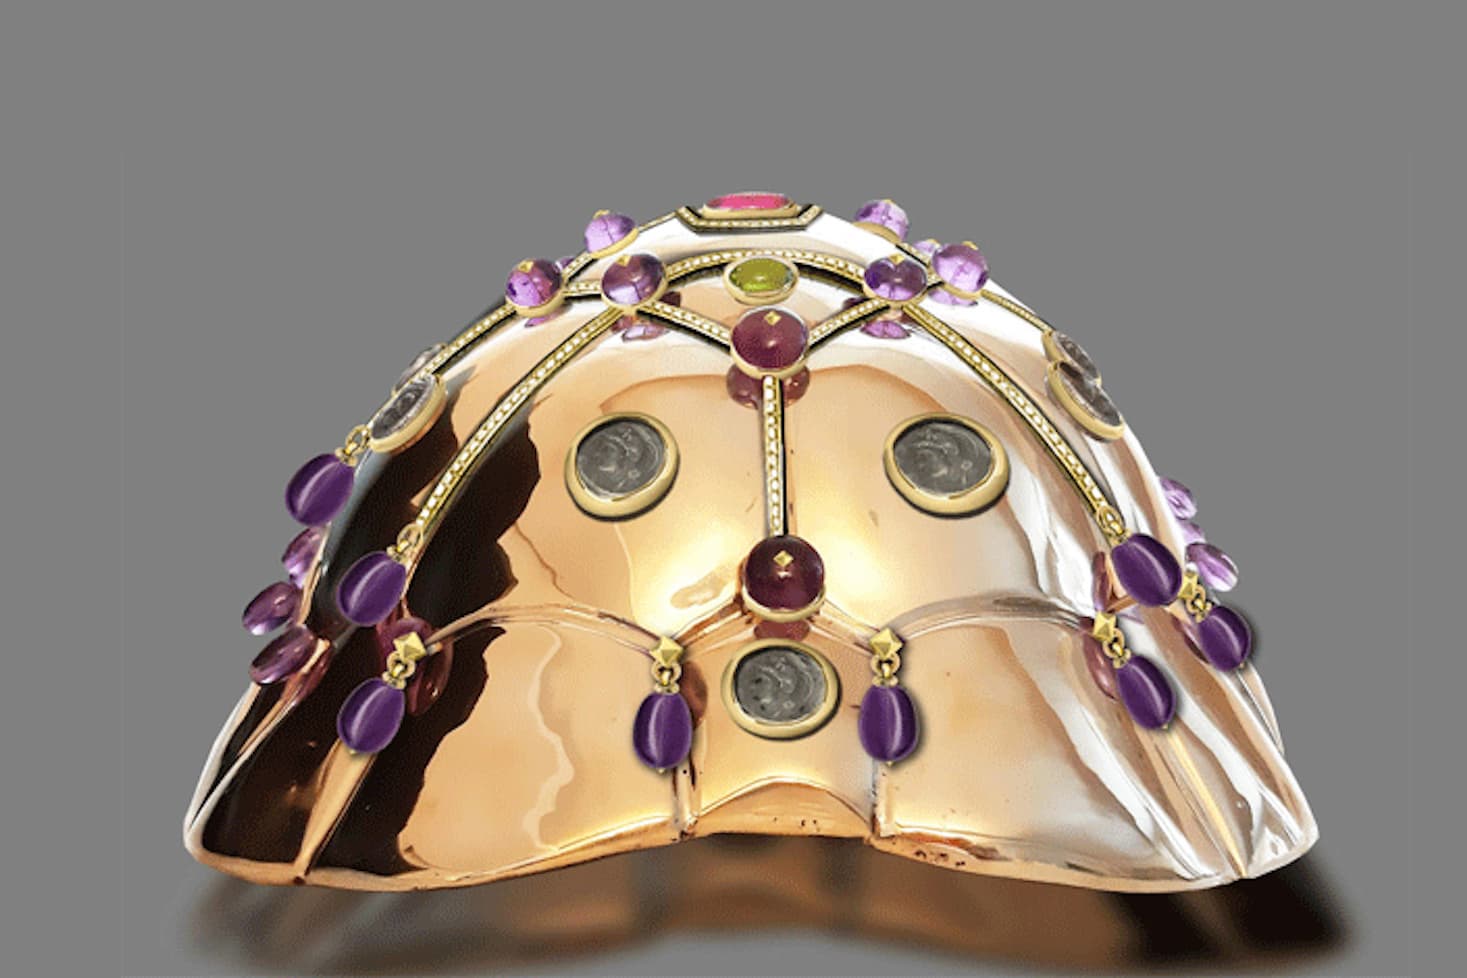 Bvlgari and Francesco Vezzoli ‘Tortue de Soirée’ objet d'art with amethyst beads and cabochon cut amethyst, rubellite, peridot, citrine, topaz, diamonds and Ancient Greek coins in yellow gold